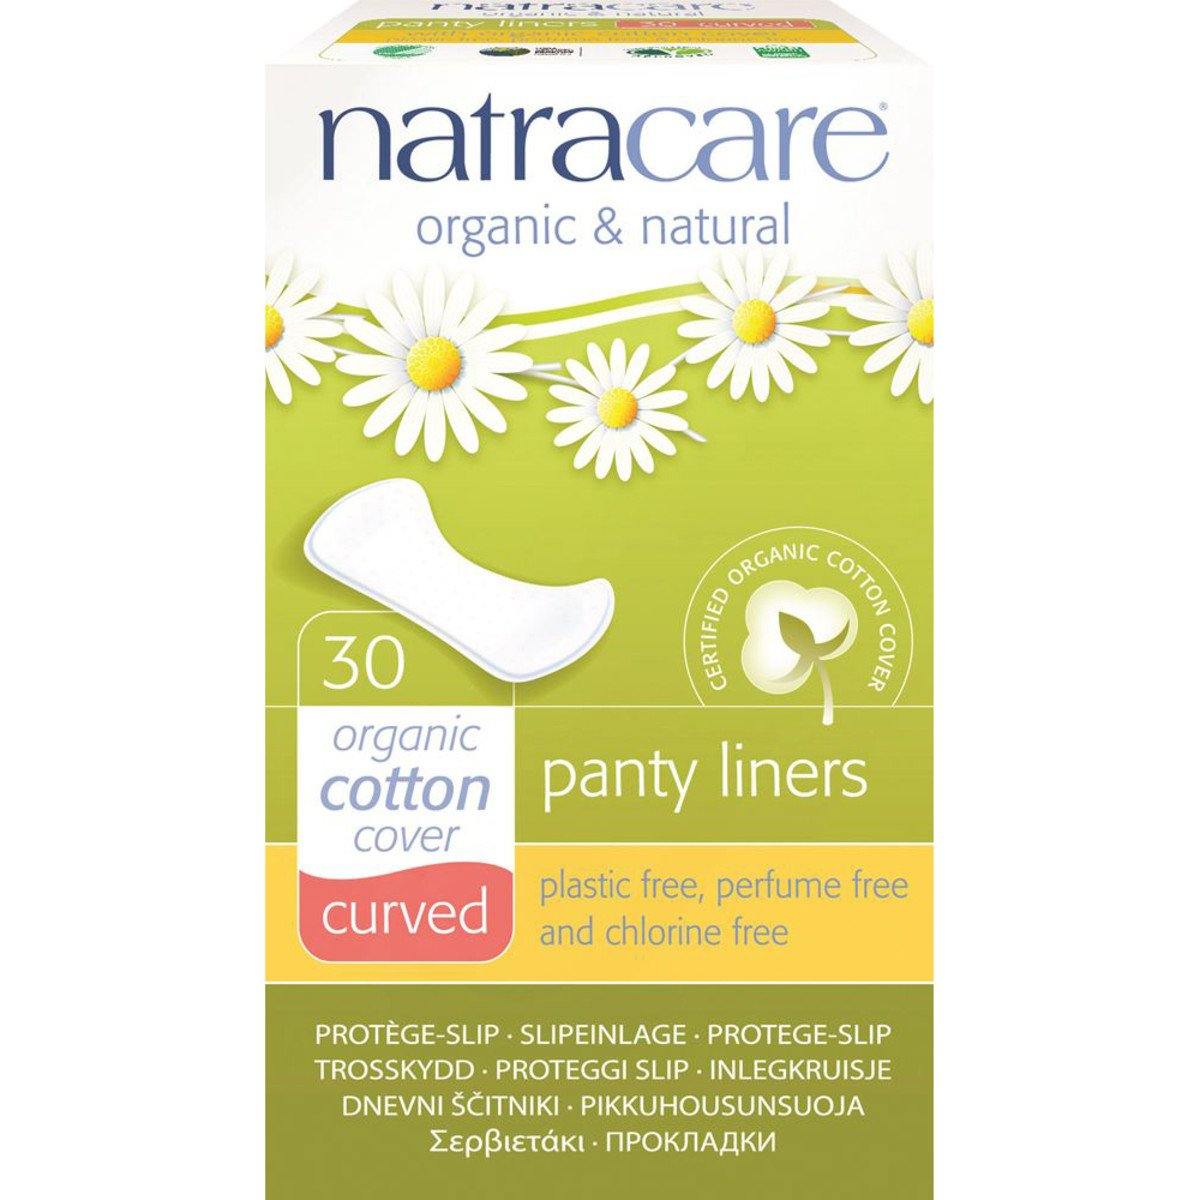 Natracare Panty Liners Curved with Organic Cotton Cover x 30 Pack - QVM Vitamins™